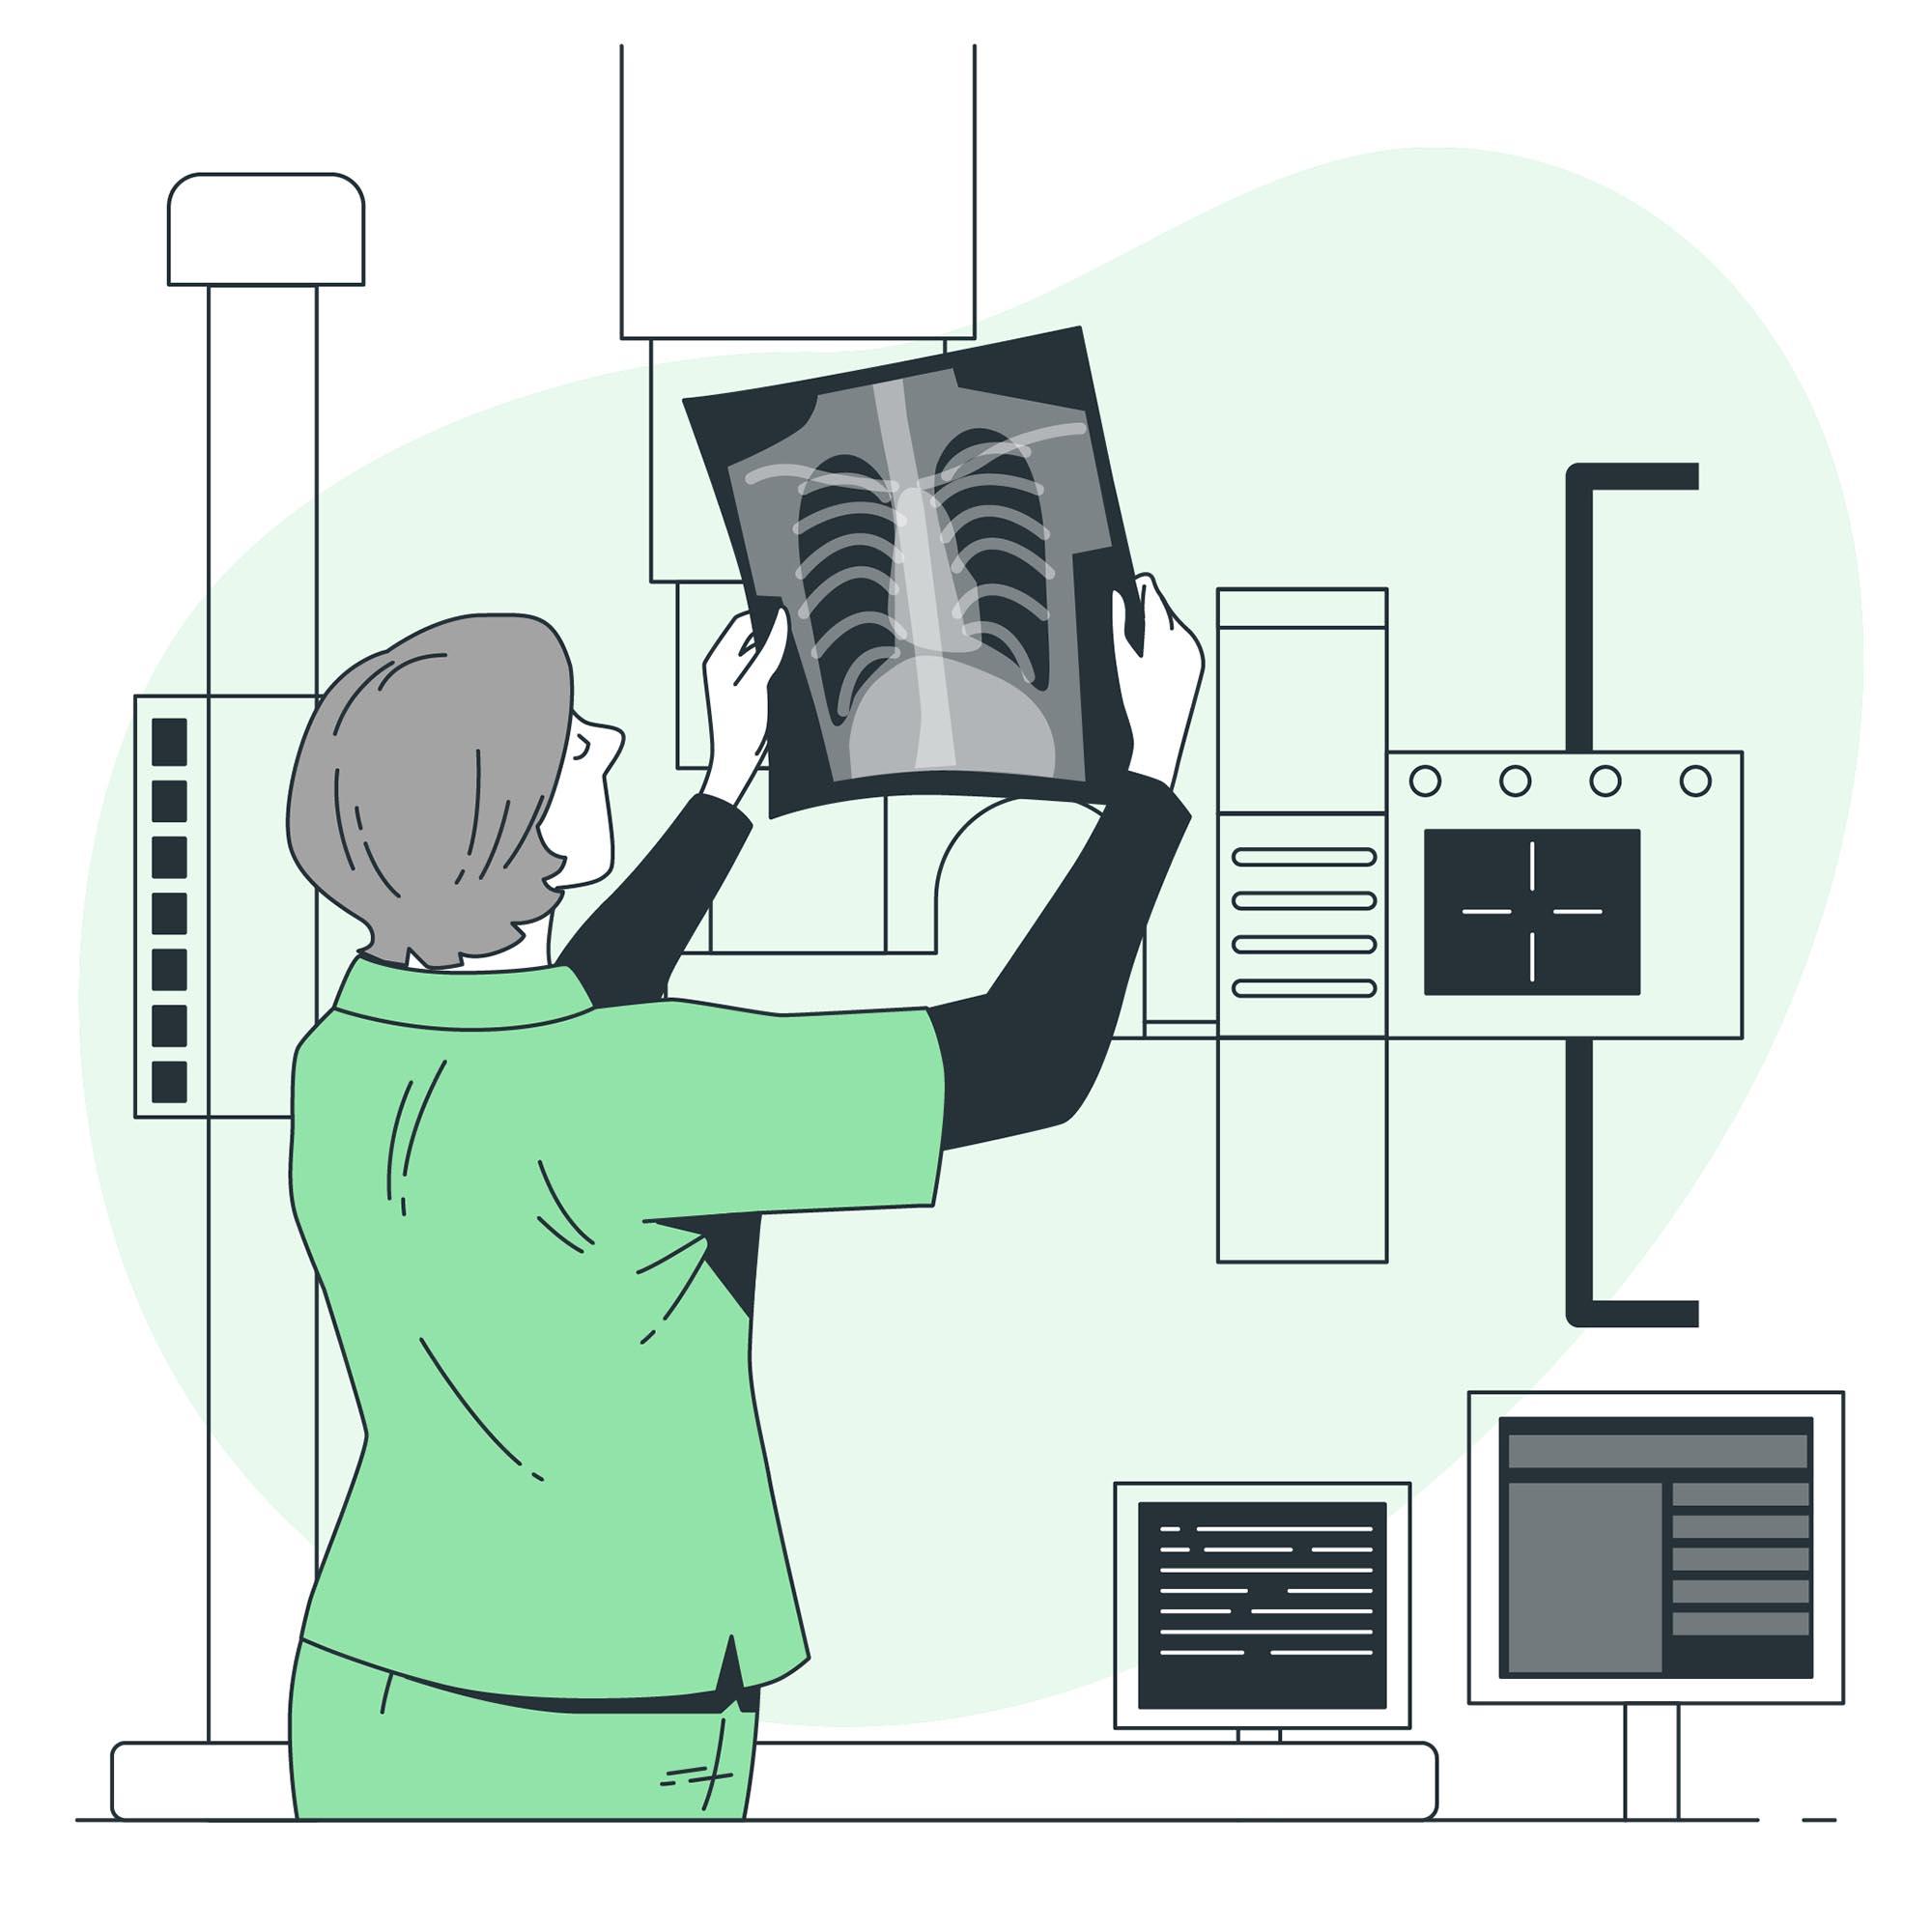 Graphic of Dental Assistant Looking at Xrays - The Super Dentists